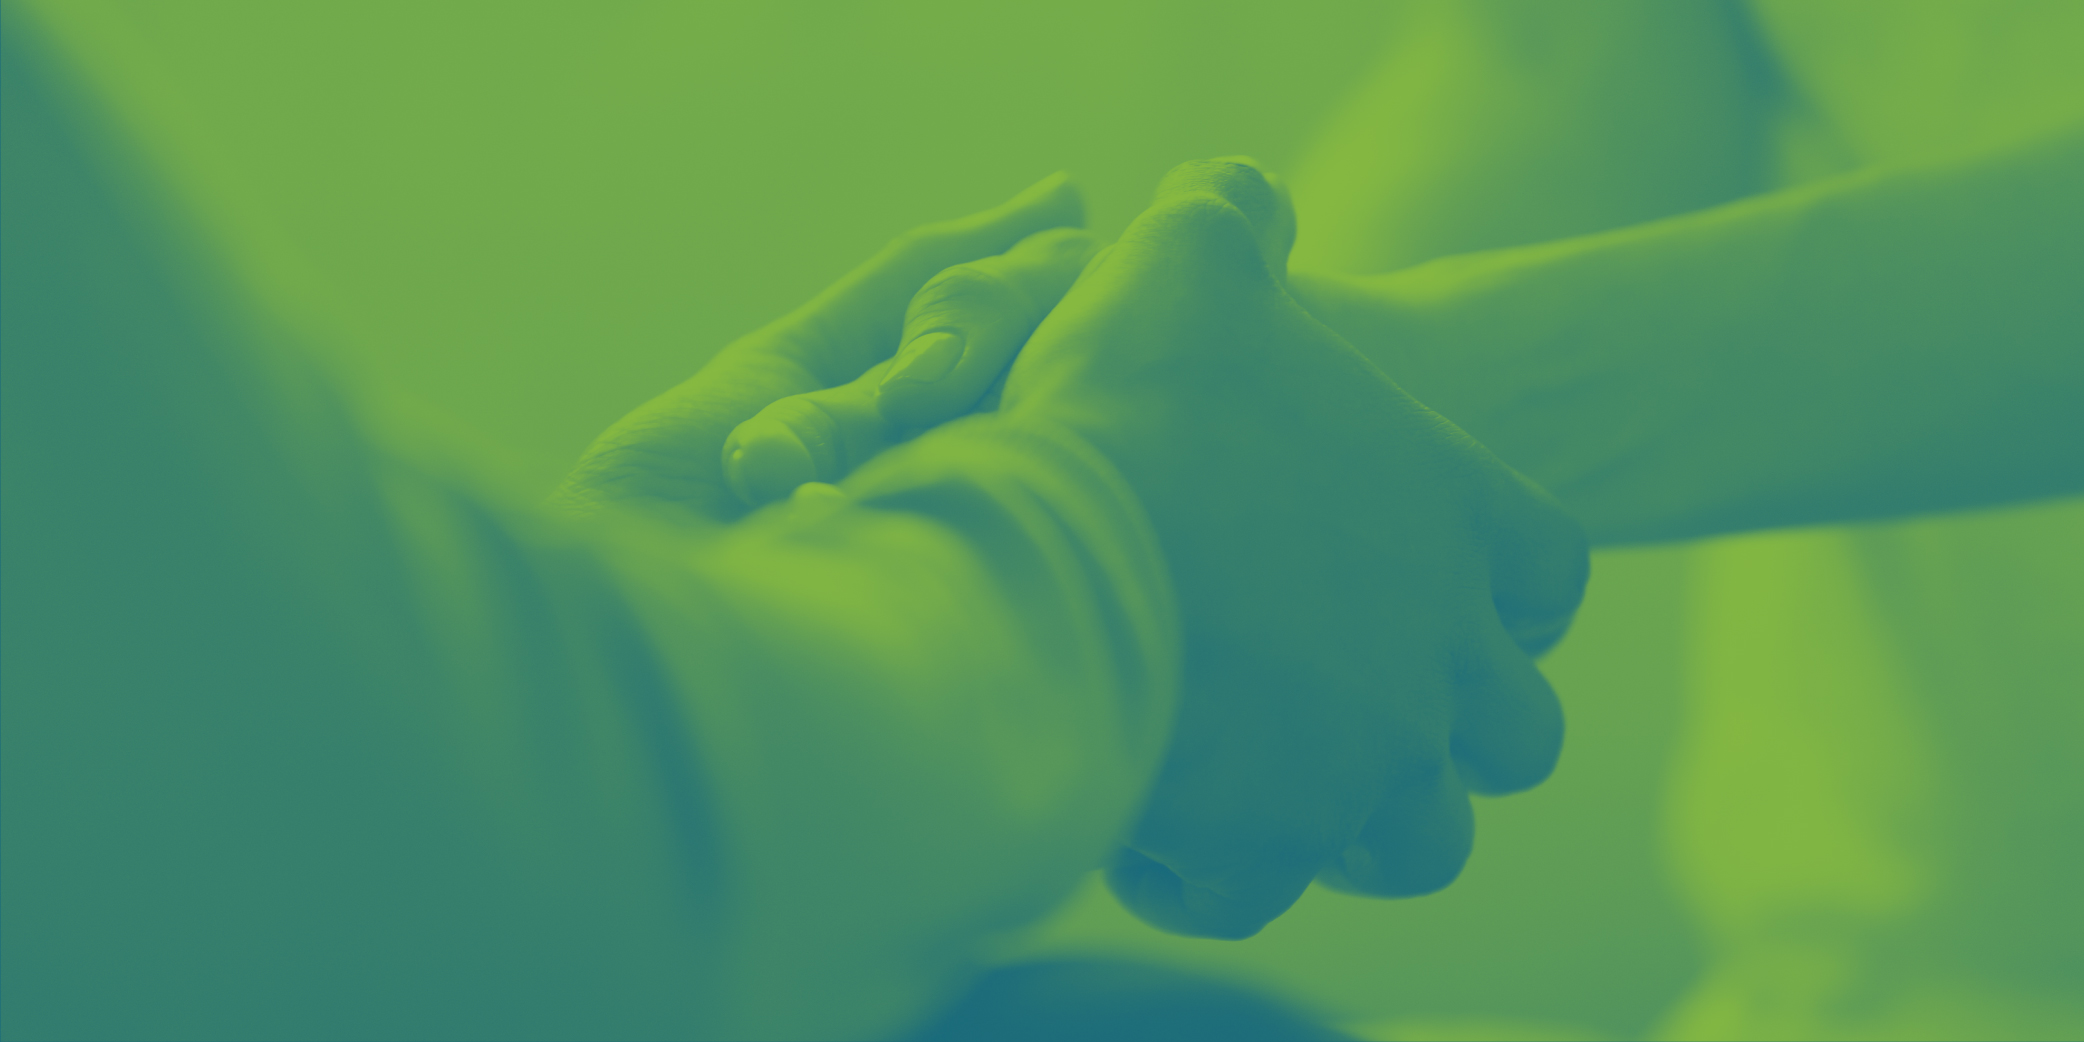 Close up shot of two people holding hands in support of one another covered by a lime green and teal duotone gradient